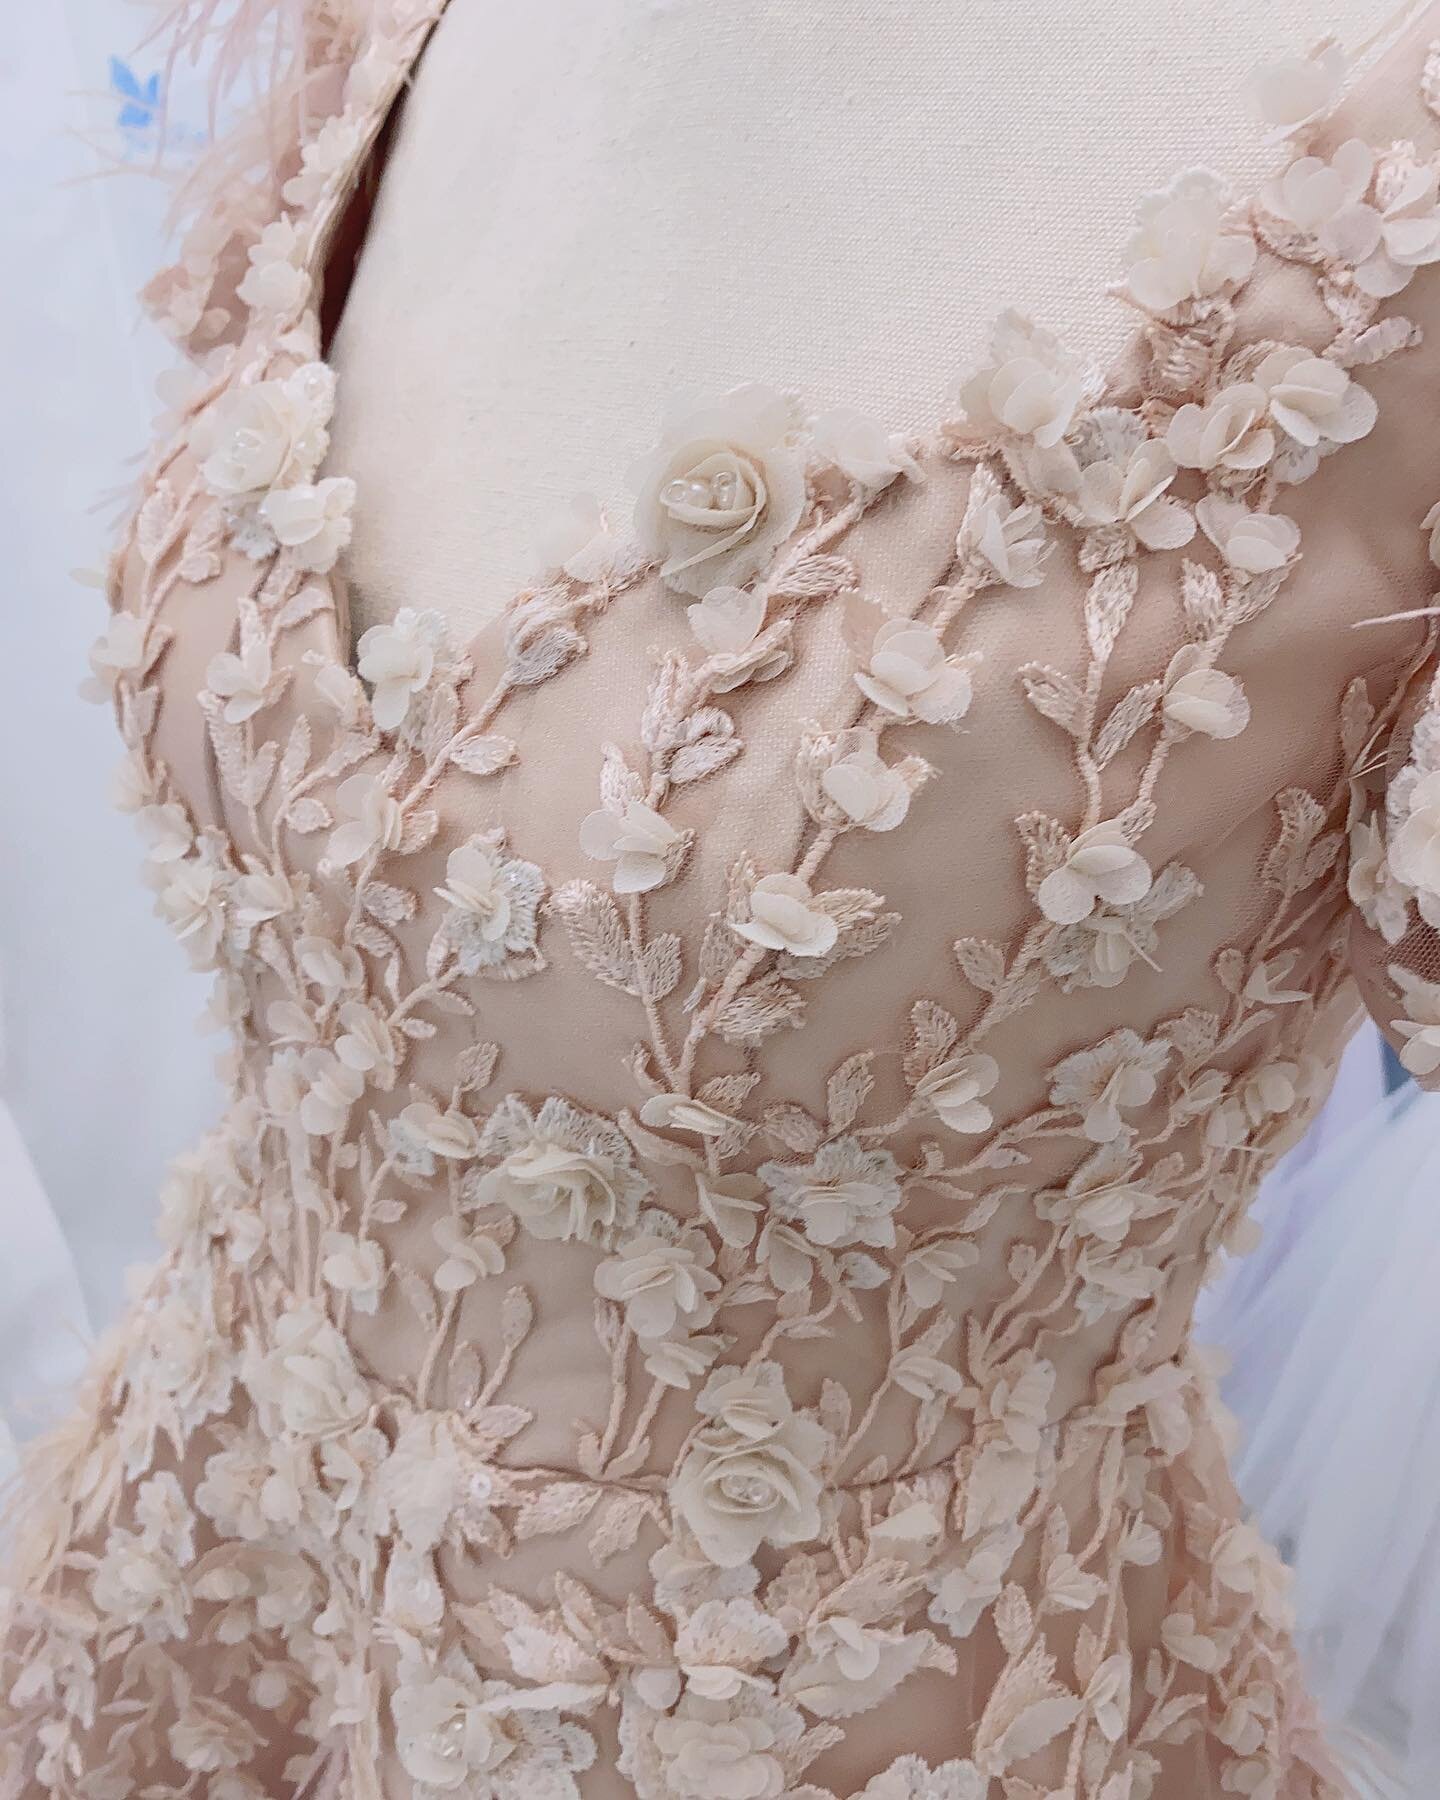 Textures, fabrics, lace, appliqu&eacute;, beading, pure silk are all part of this creation.
.
.
#specialoccasionsgown #engagementgown #custommade #textures #Whitebutterflybridalcouture #details #love